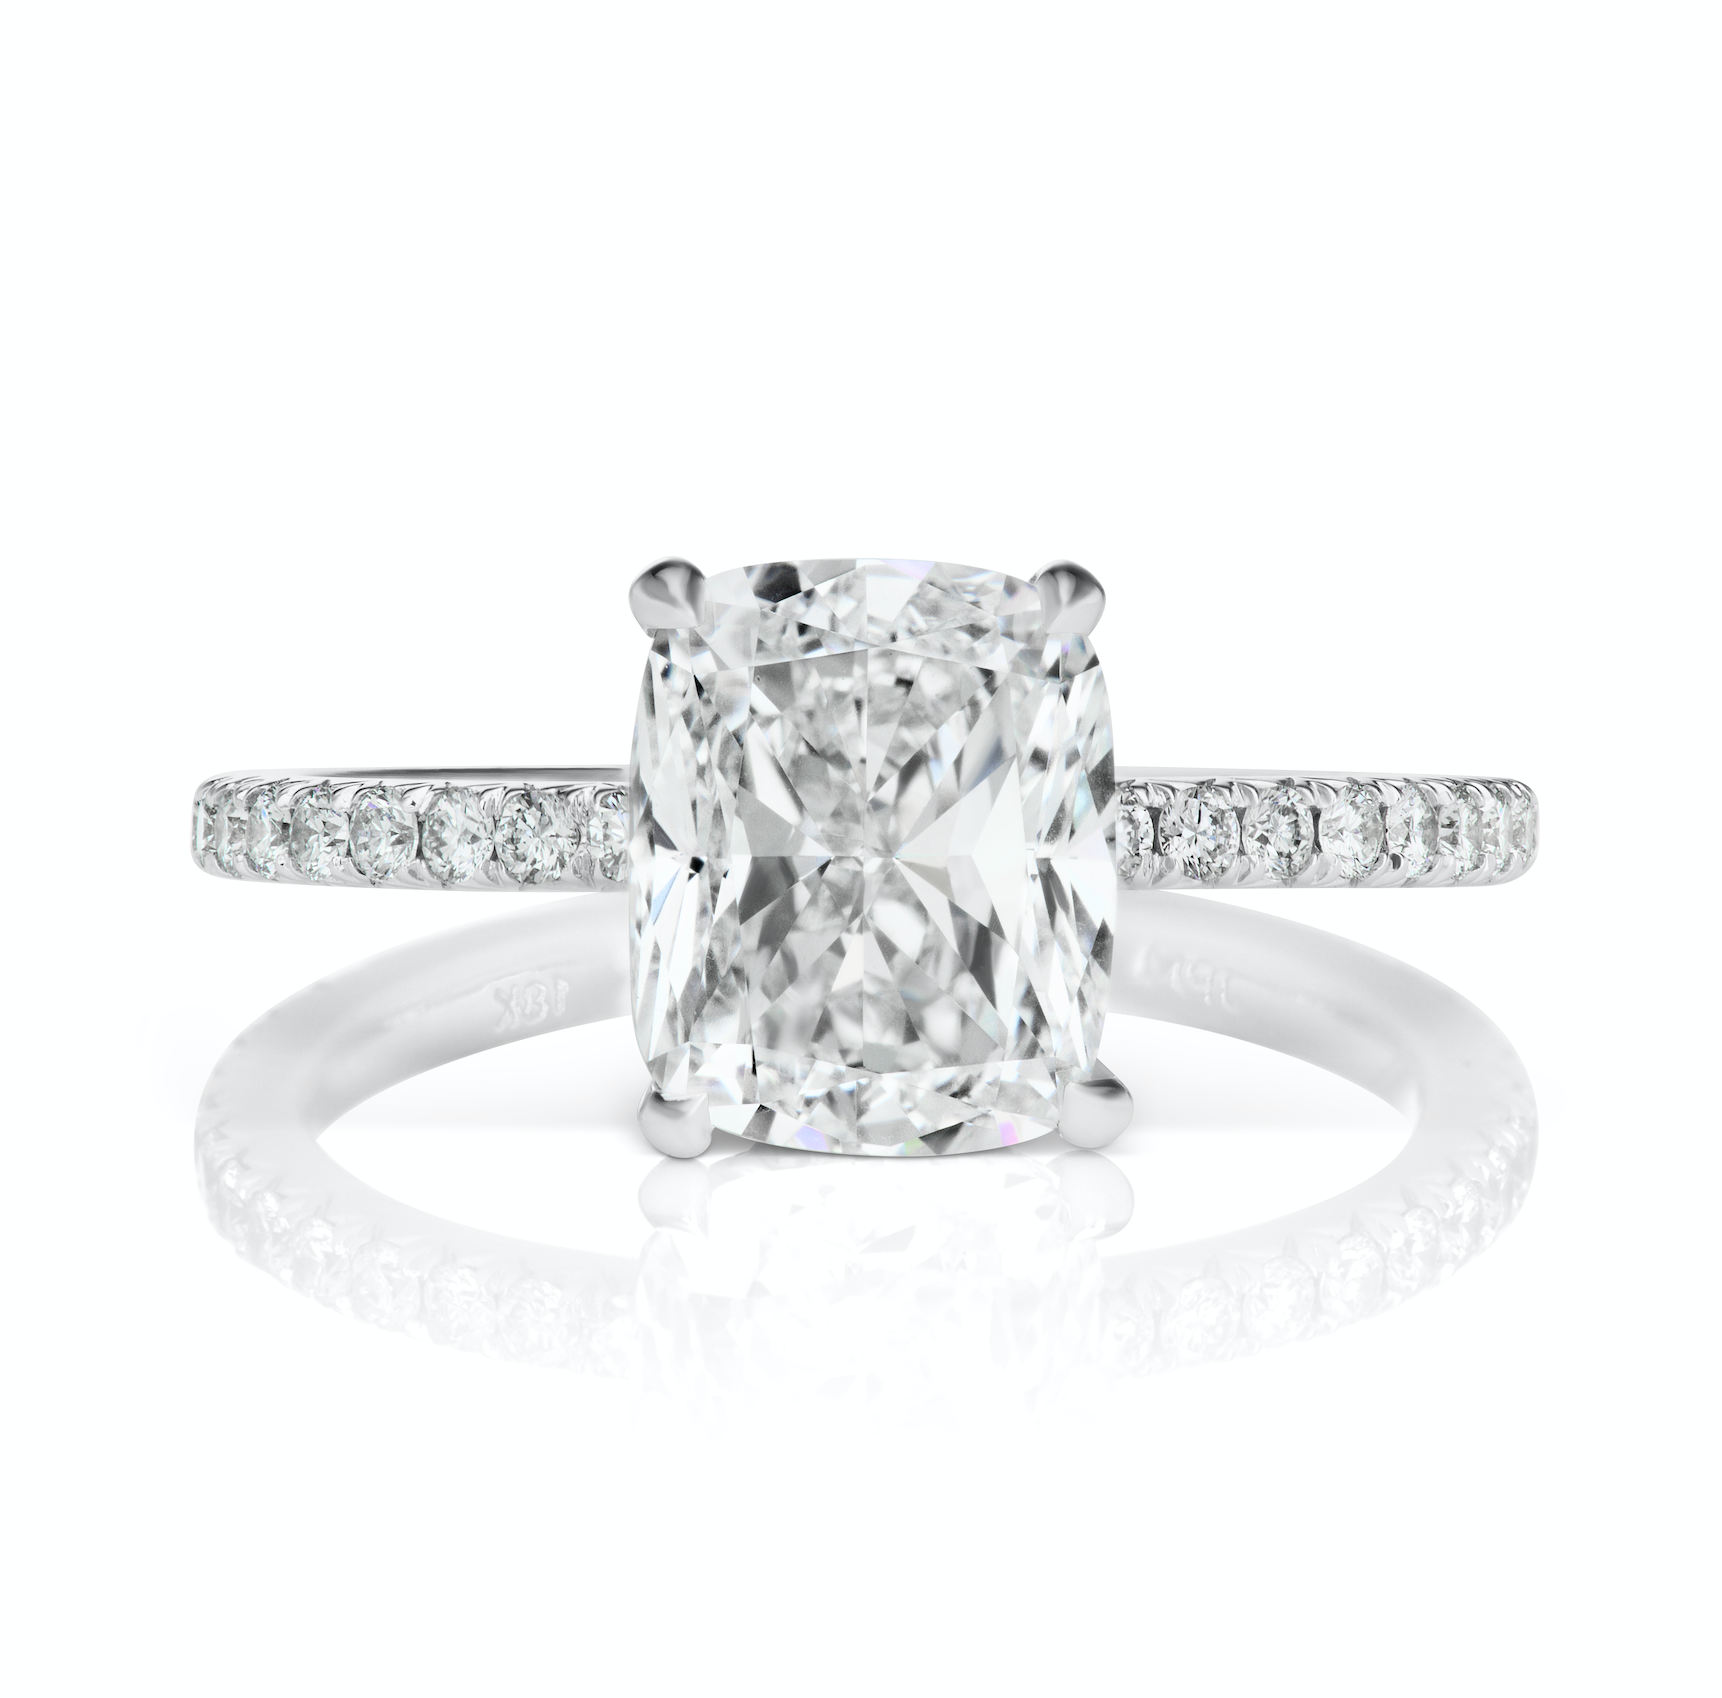 Diamond Ring Cushion Cut 4 Carat Solitaire Ring in 18K White Gold Front View